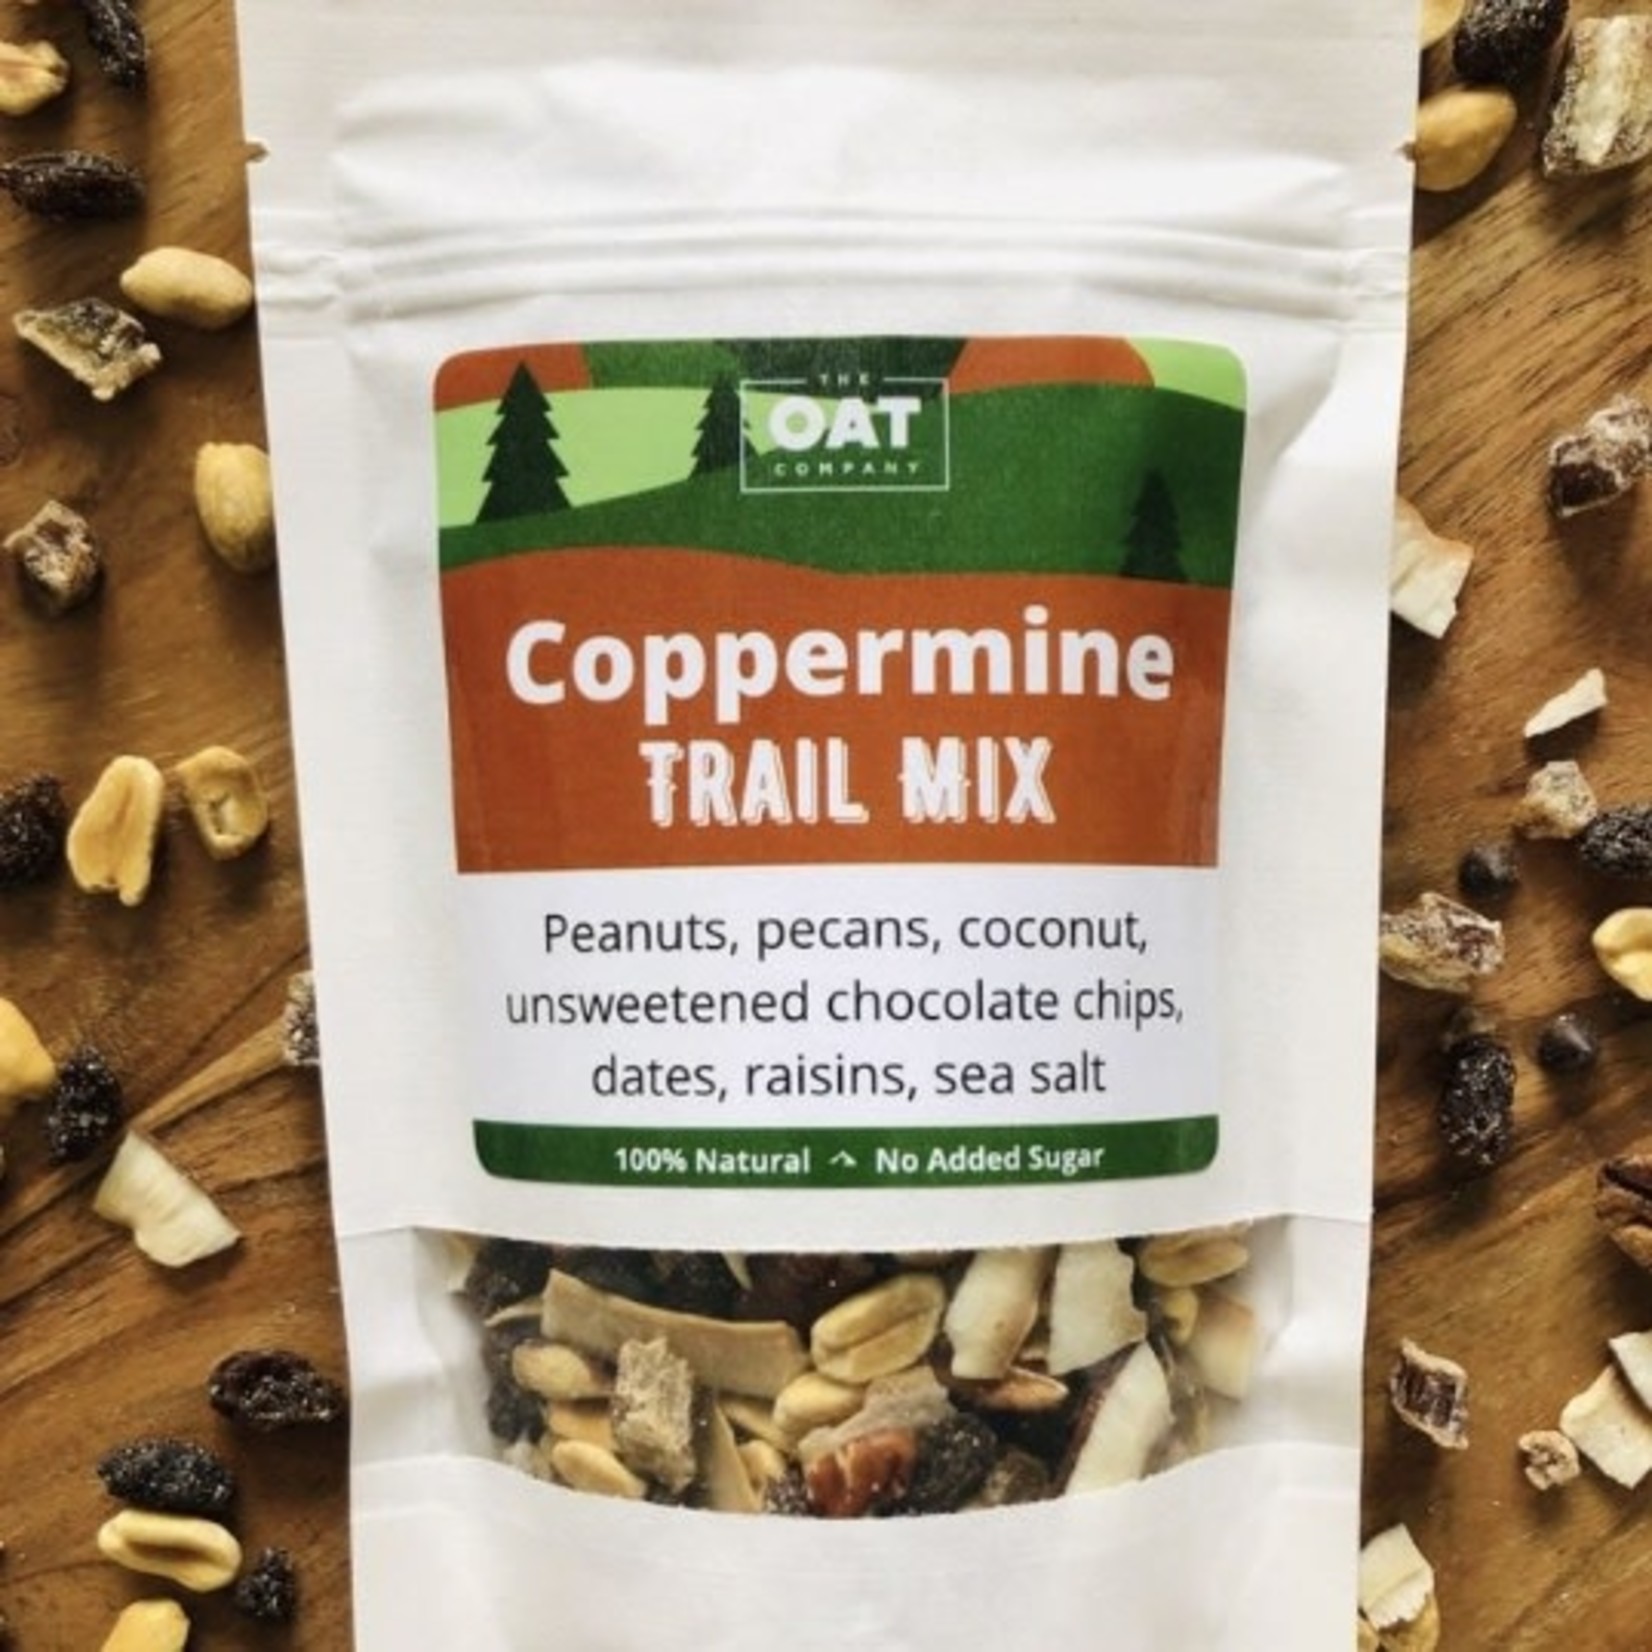 The Oat Company The Oat Company Coppermine Trail Mix